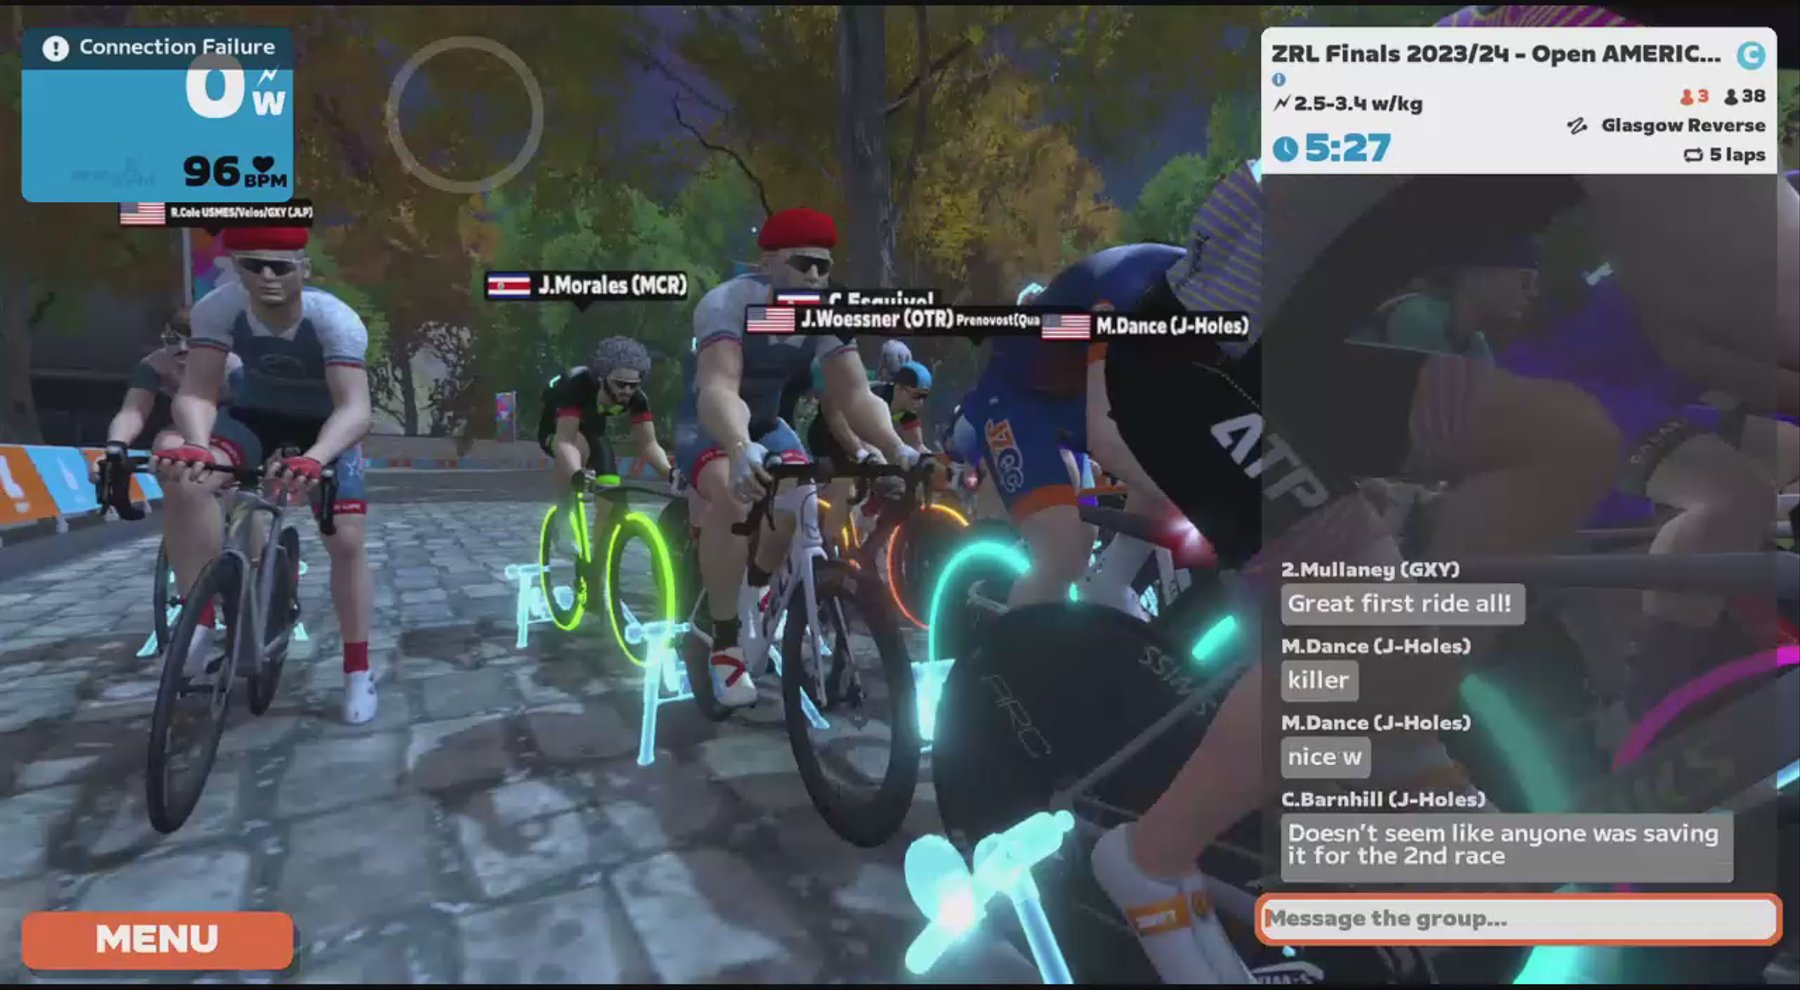 Zwift - Race: ZRL Finals 2023/24 - Open AMERICA Division 1 - Plate Final (Part2) (C) on Glasgow Reverse in Scotland